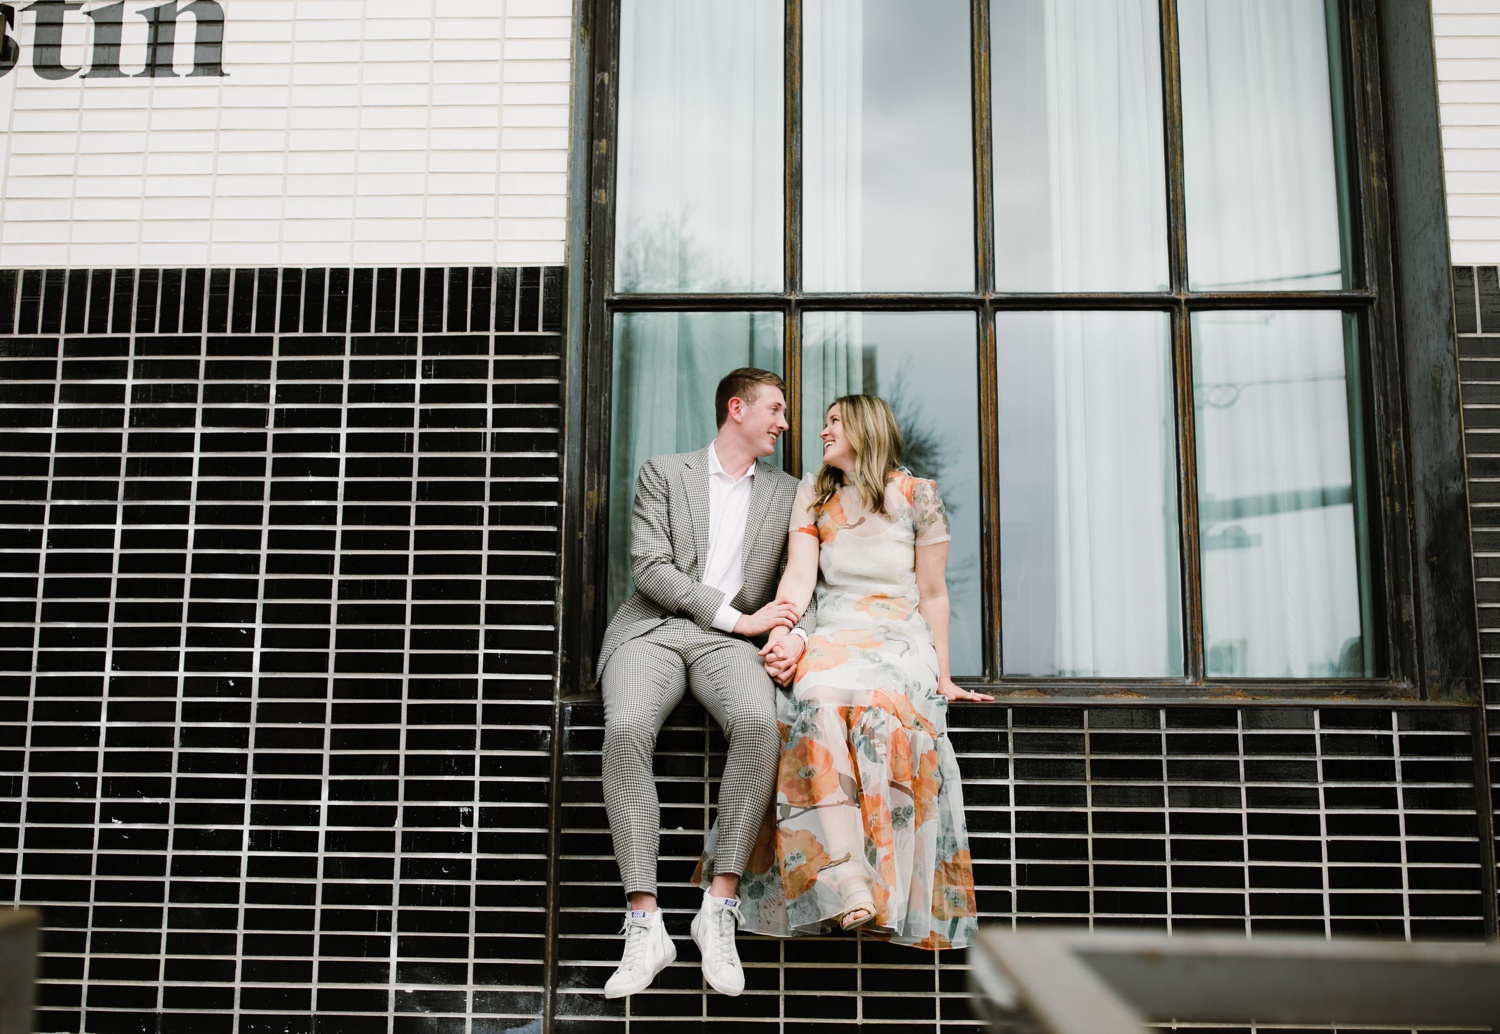 Bride in an aqua and coral maxi dress for her engagement session at South Congress Hotel